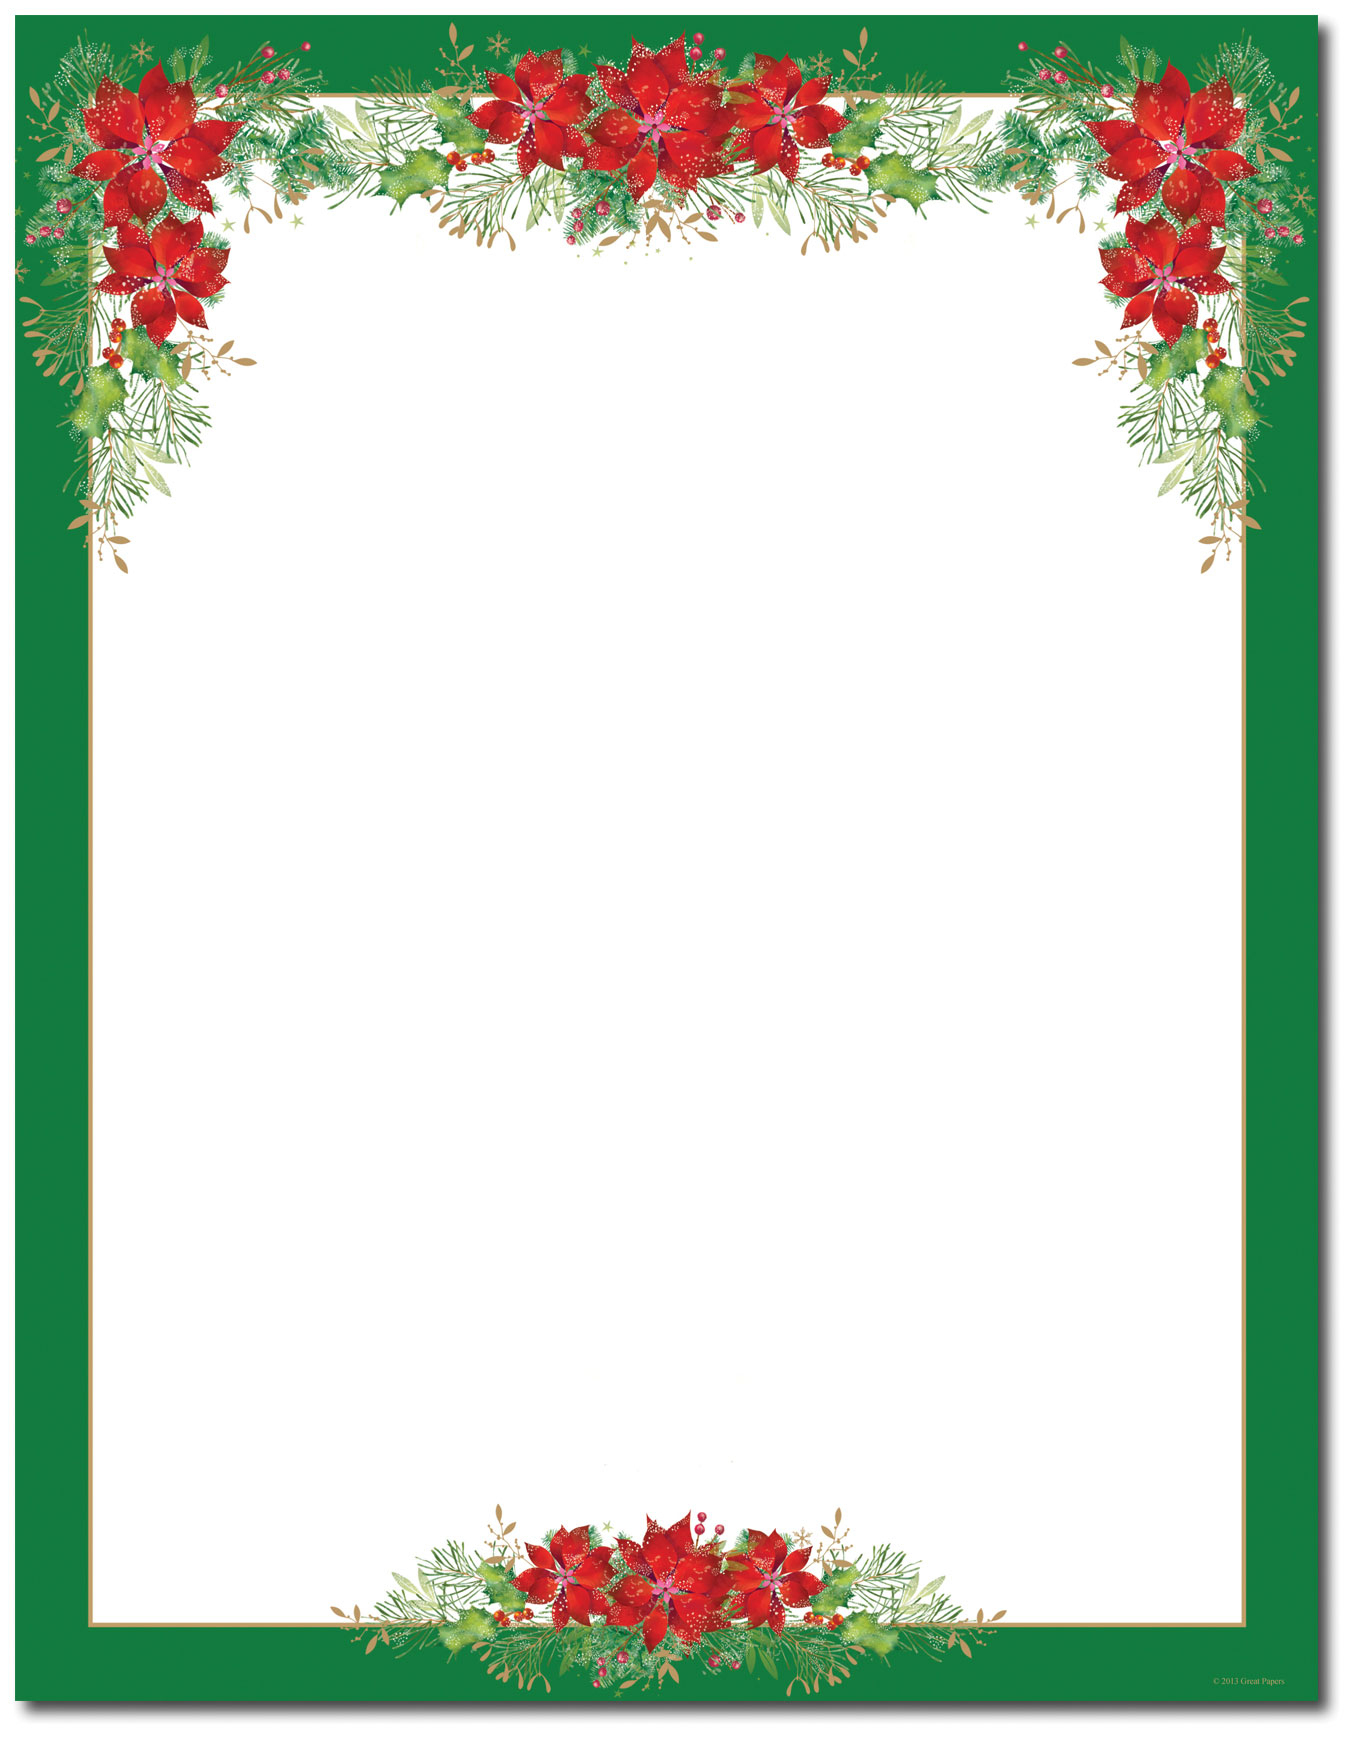 15 Poinsettia Page Border Designs Images - Free Printable Christmas - Free Printable Page Borders Christmas